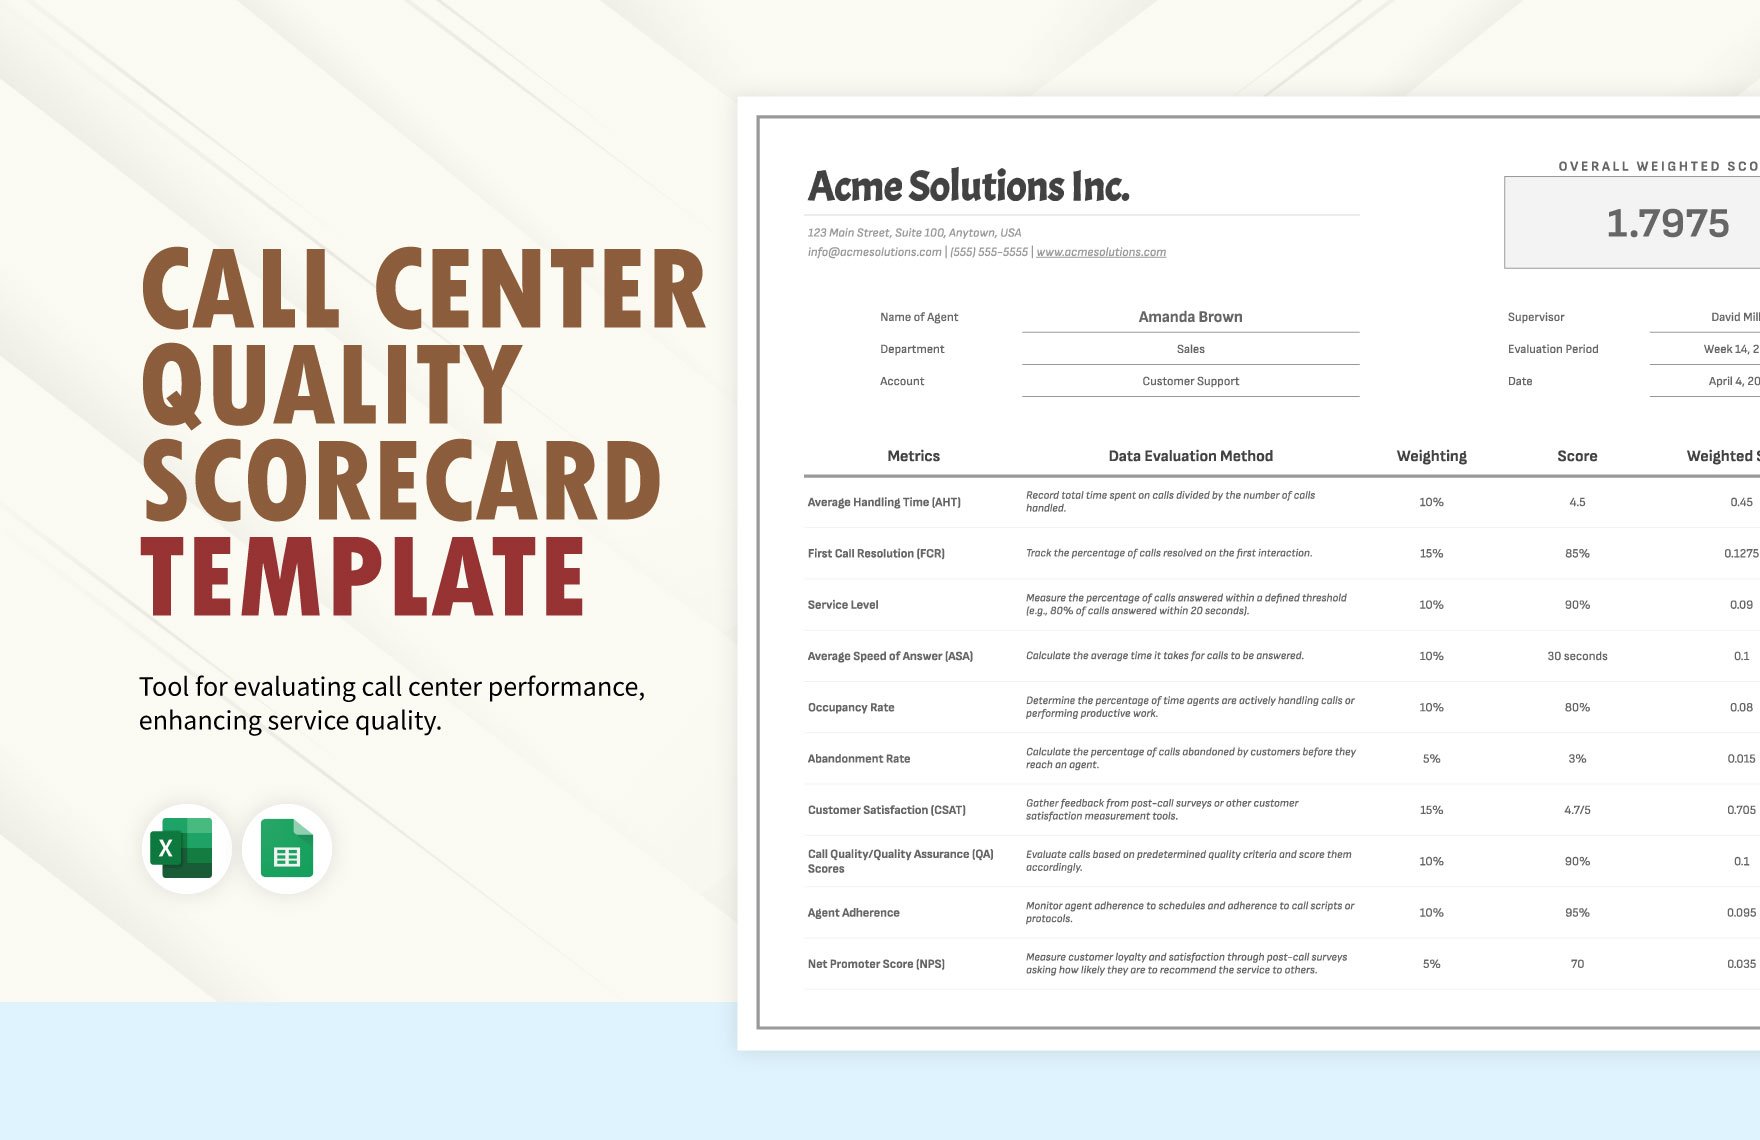 Call Center Quality Scorecard Template in Excel, Google Sheets